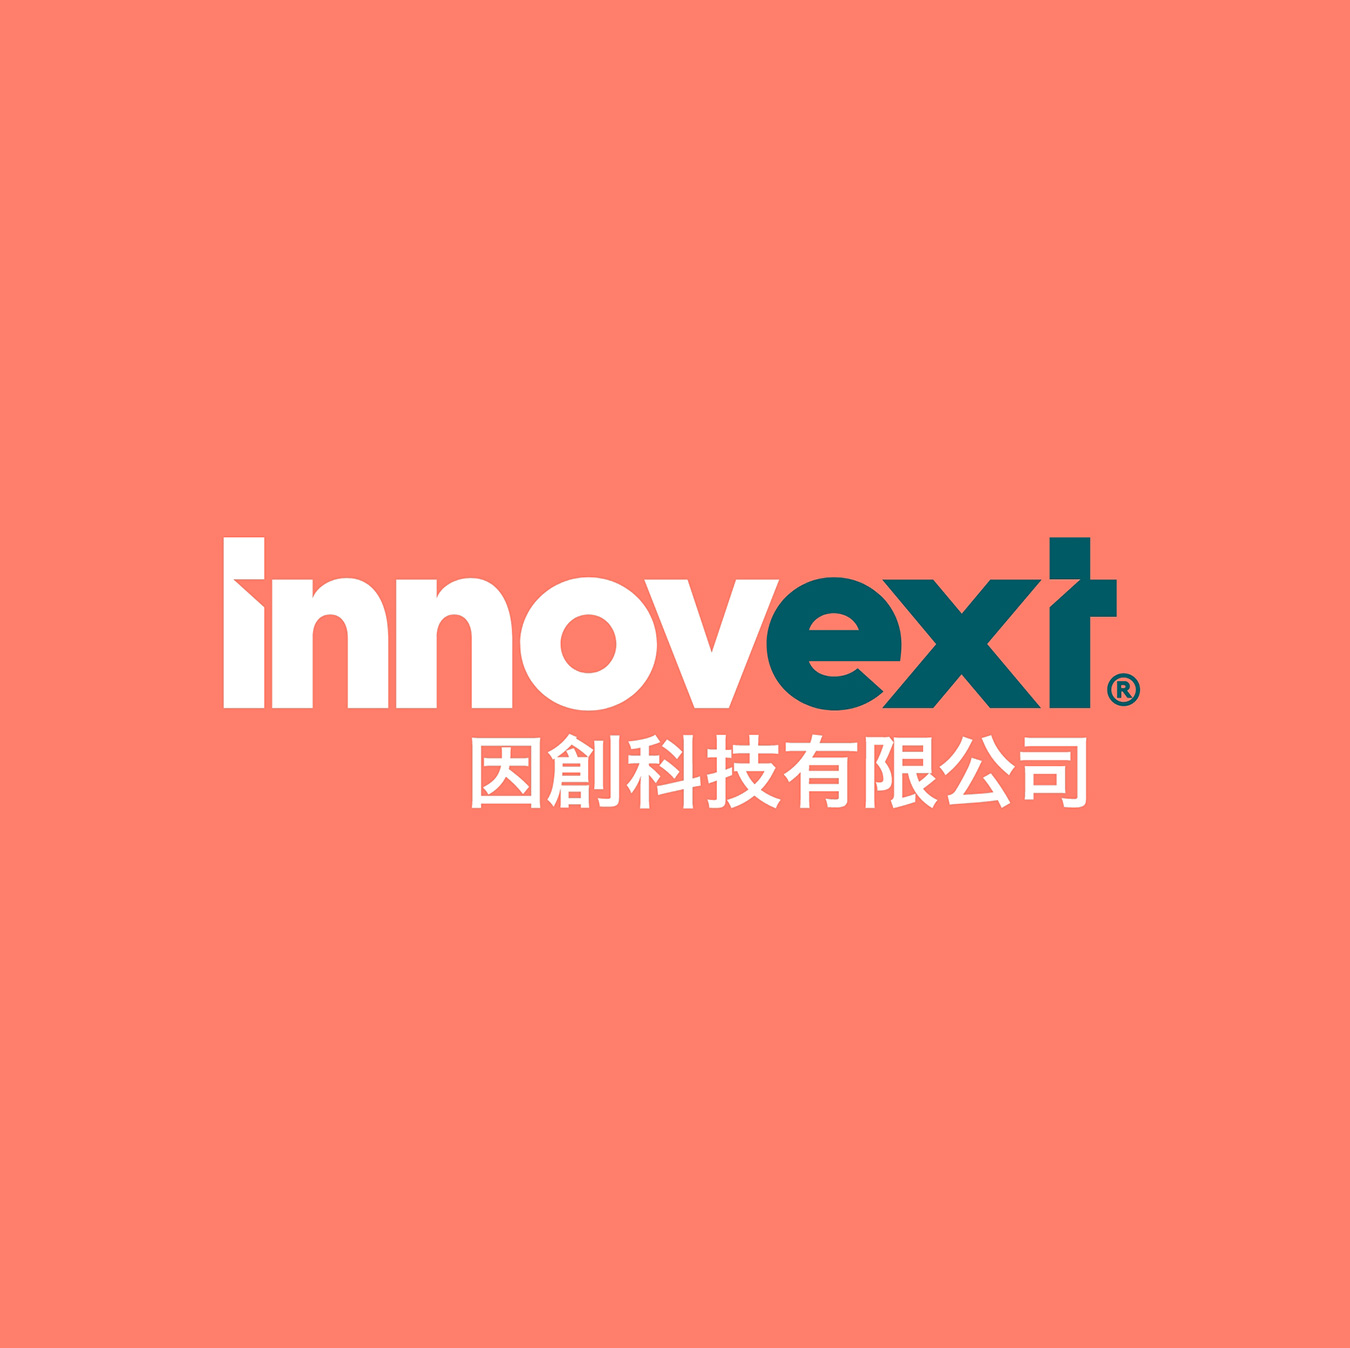 Innovext Brand Development Design by TL Design Co.